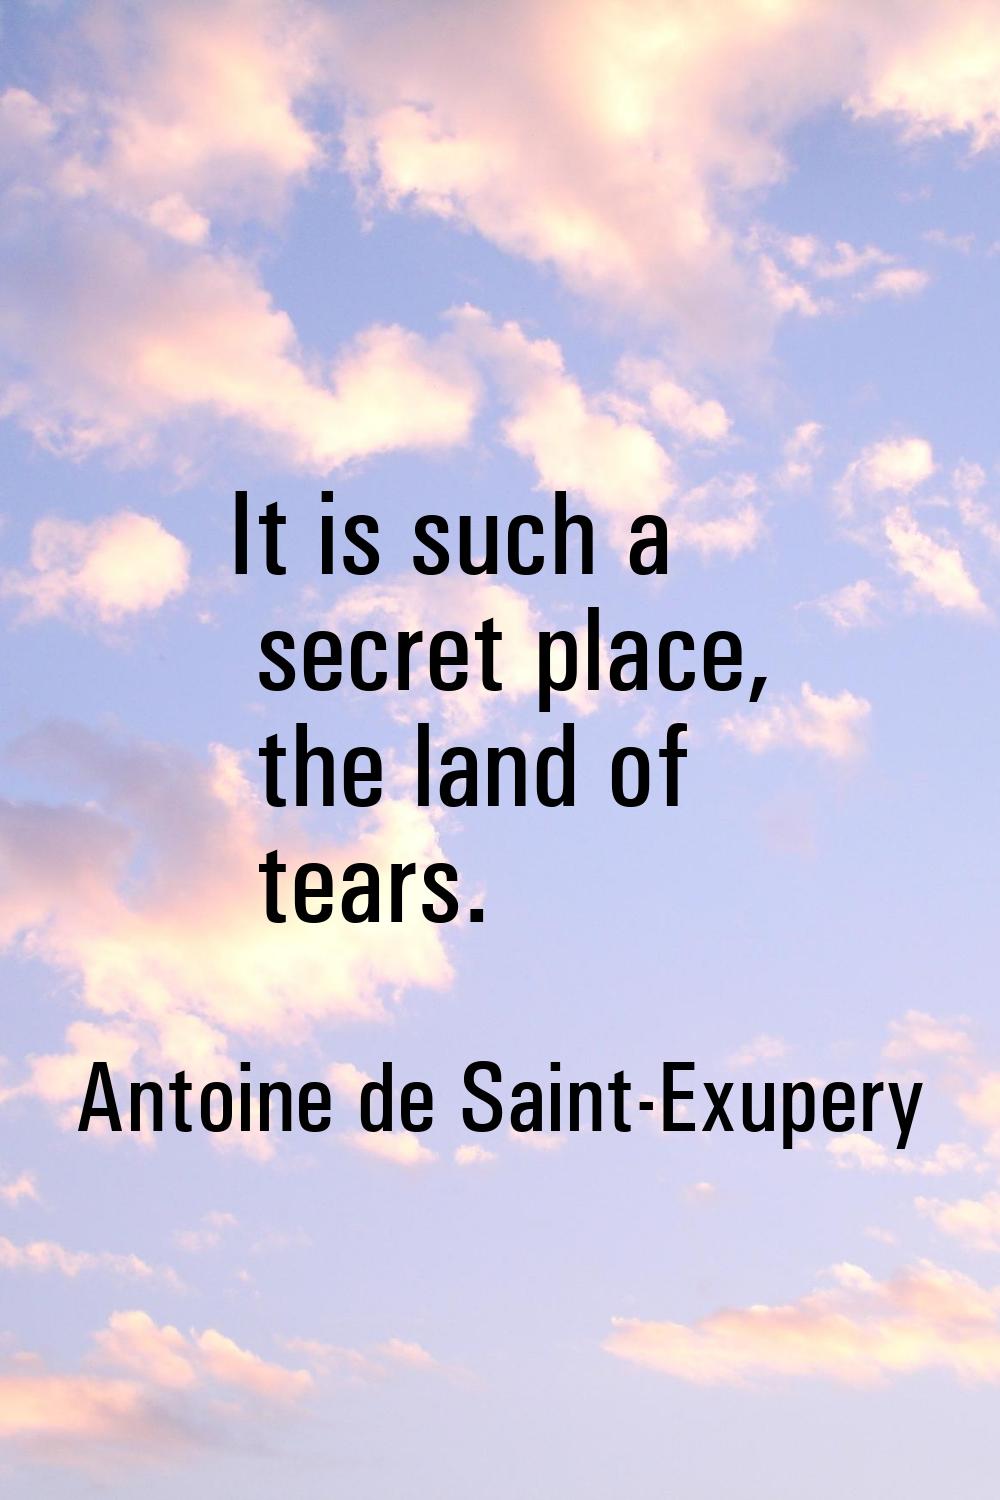 It is such a secret place, the land of tears.